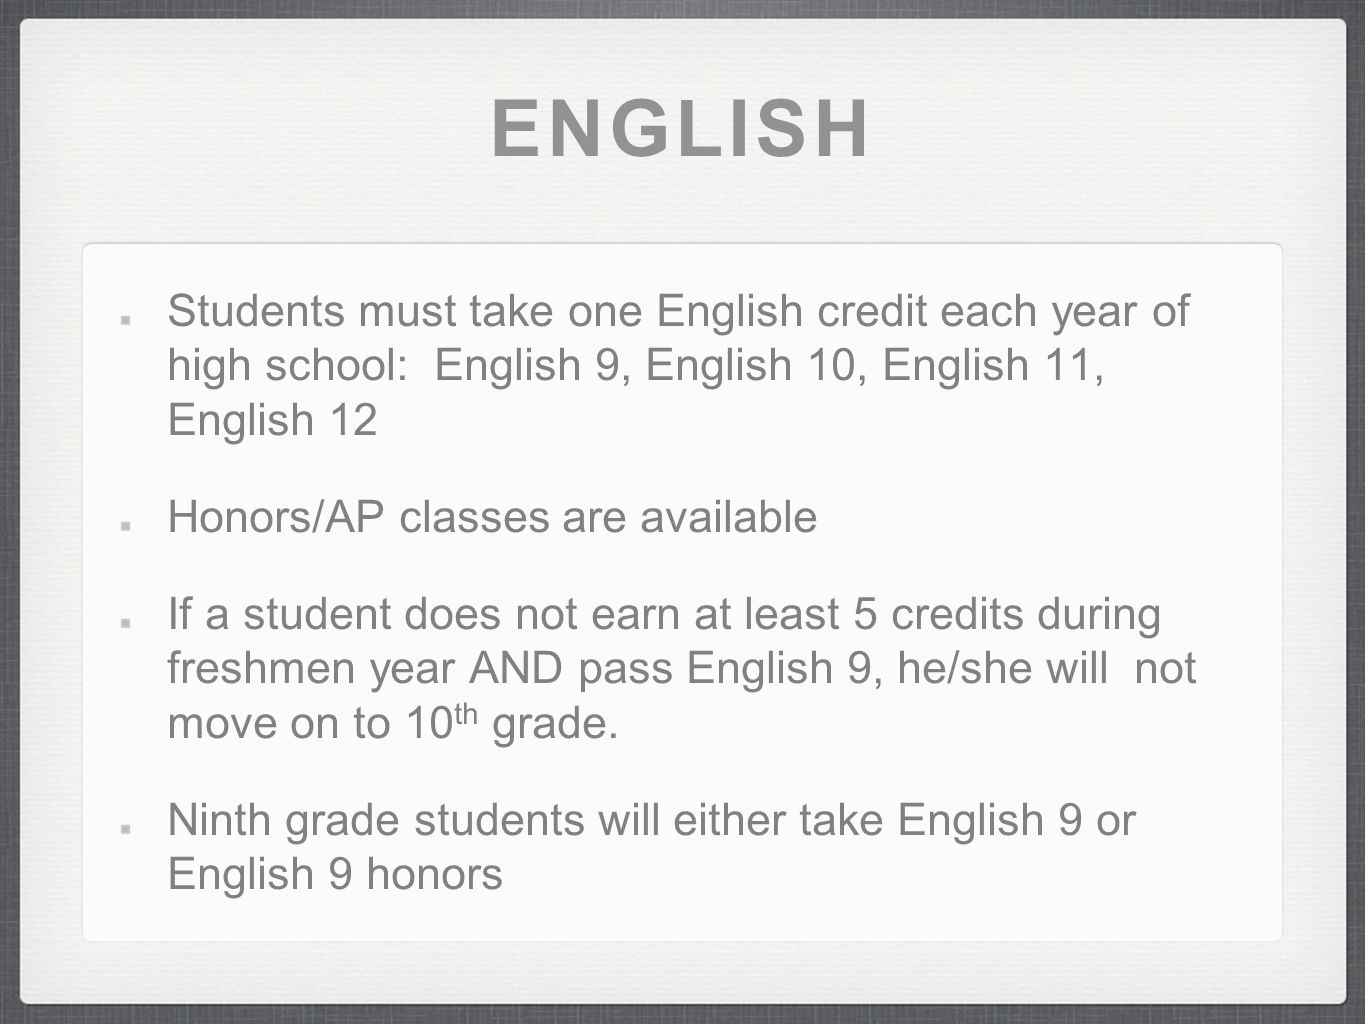 ENGLISH Students must take one English credit each year of high school: English 9, English 10, English 11, English 12 Honors/AP classes are available If a student does not earn at least 5 credits during freshmen year AND pass English 9, he/she will not move on to 10 th grade.